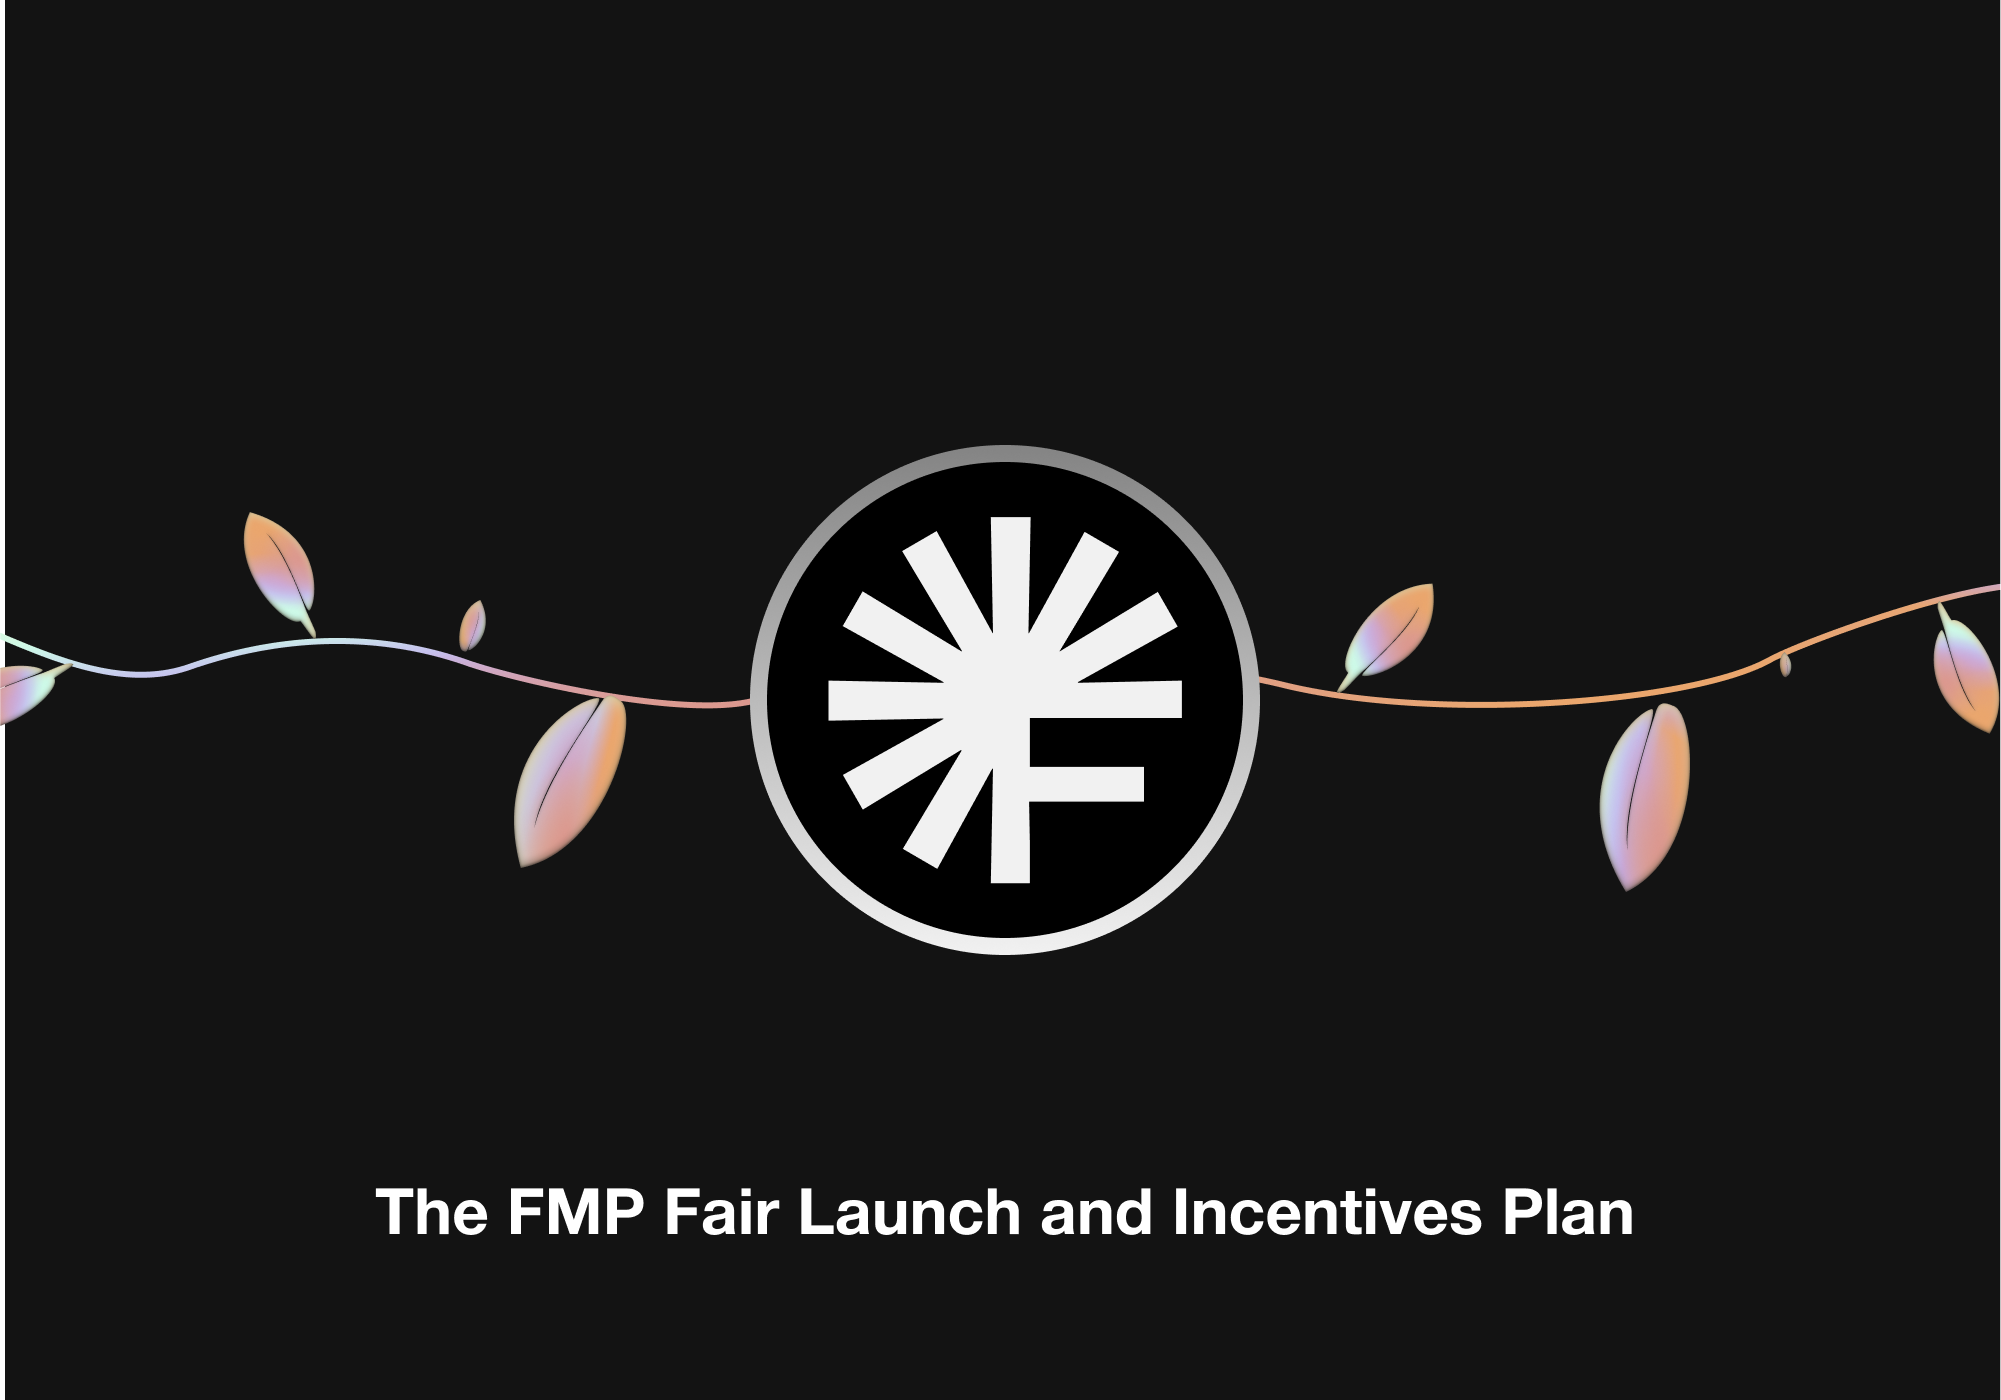 The Flat Money Points (FMP) Fair Launch and Incentives Plan